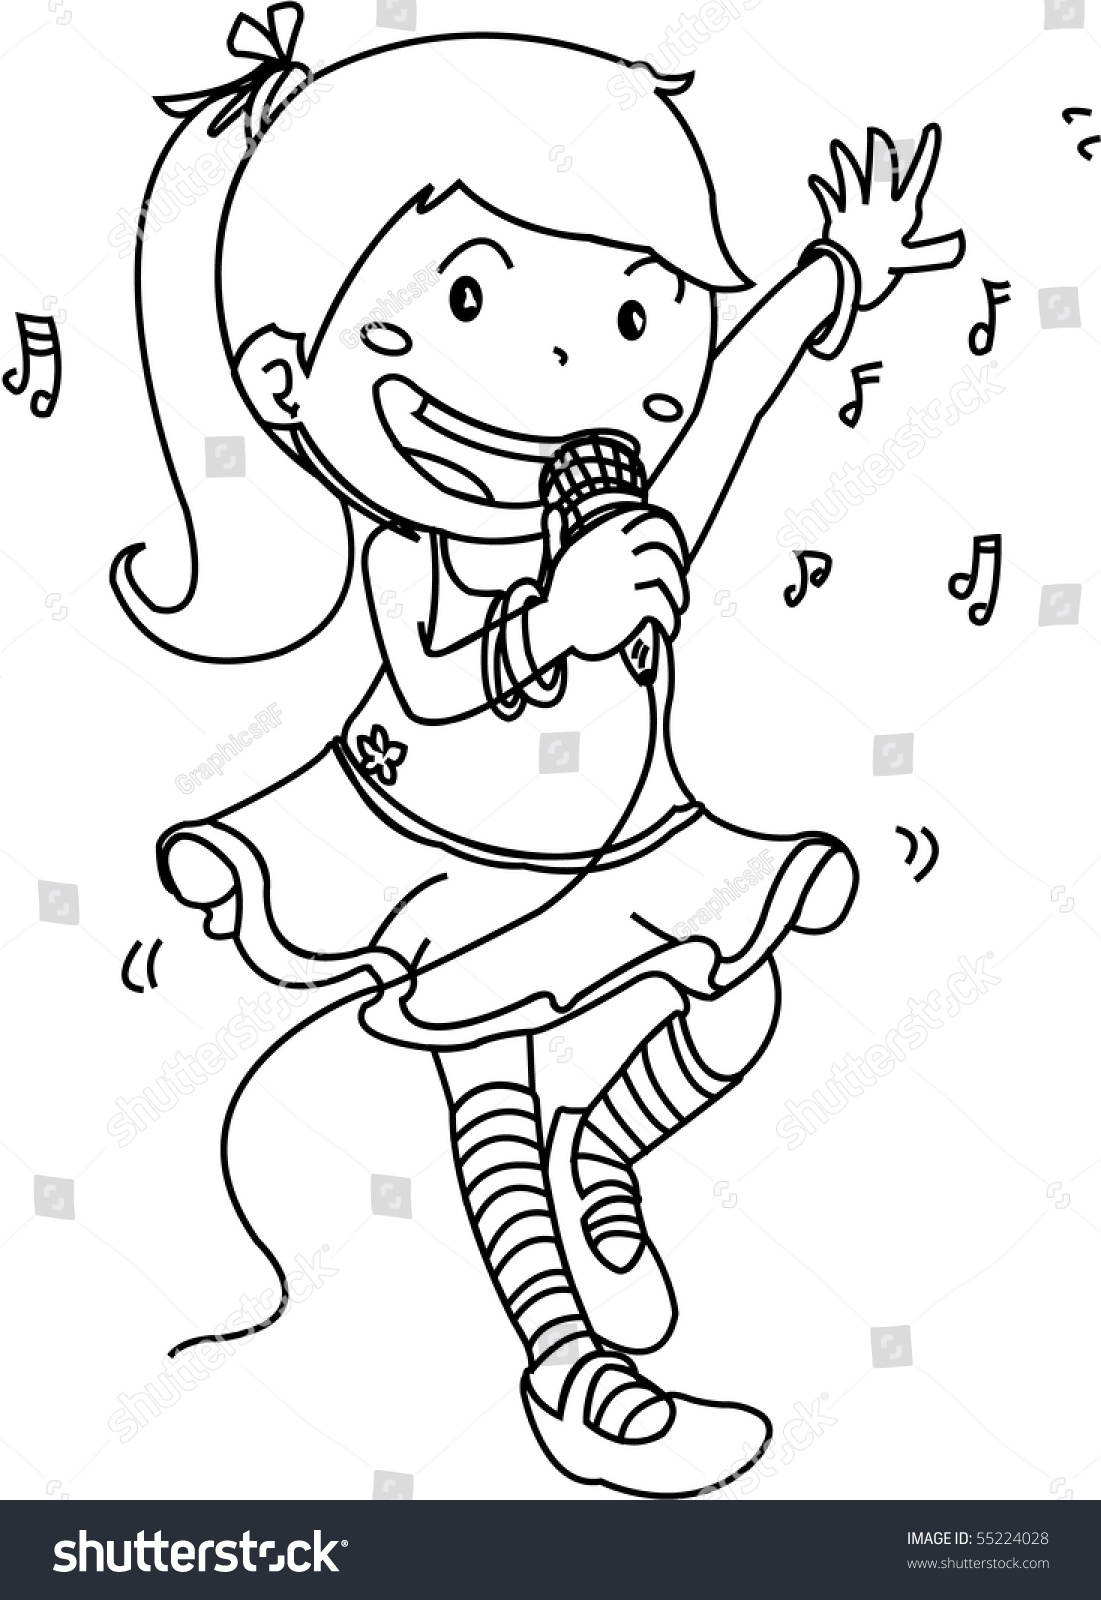 Sketch Of A Singer Girl On White Background Stock Photo 55224028